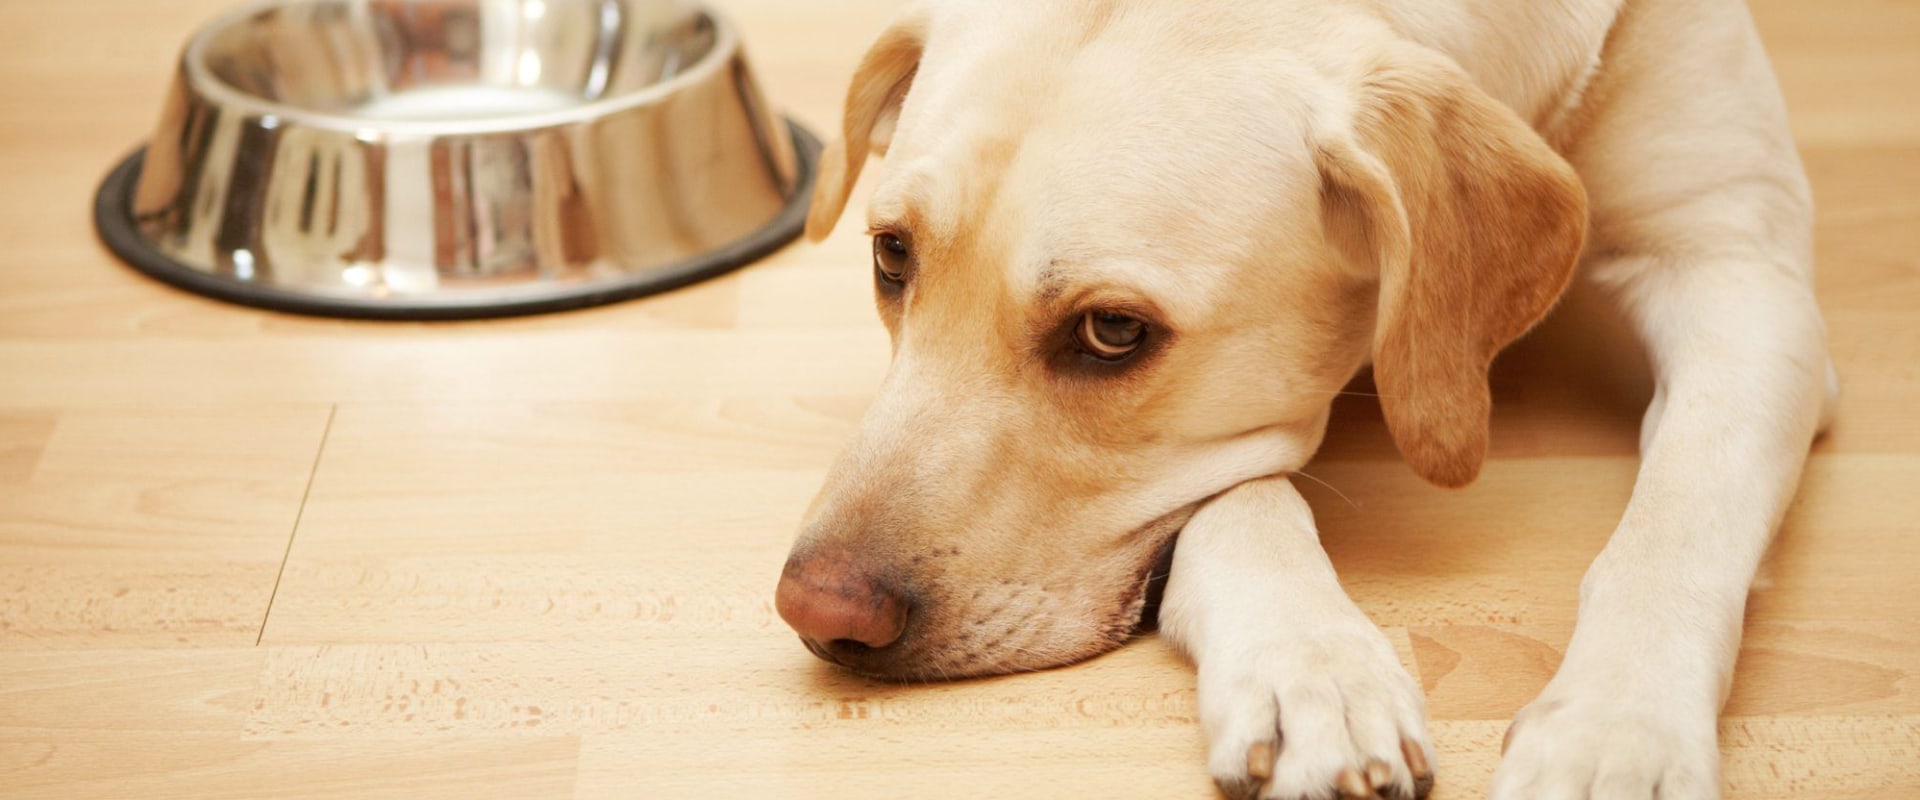 What Dog Food is Harming Our Furry Friends?